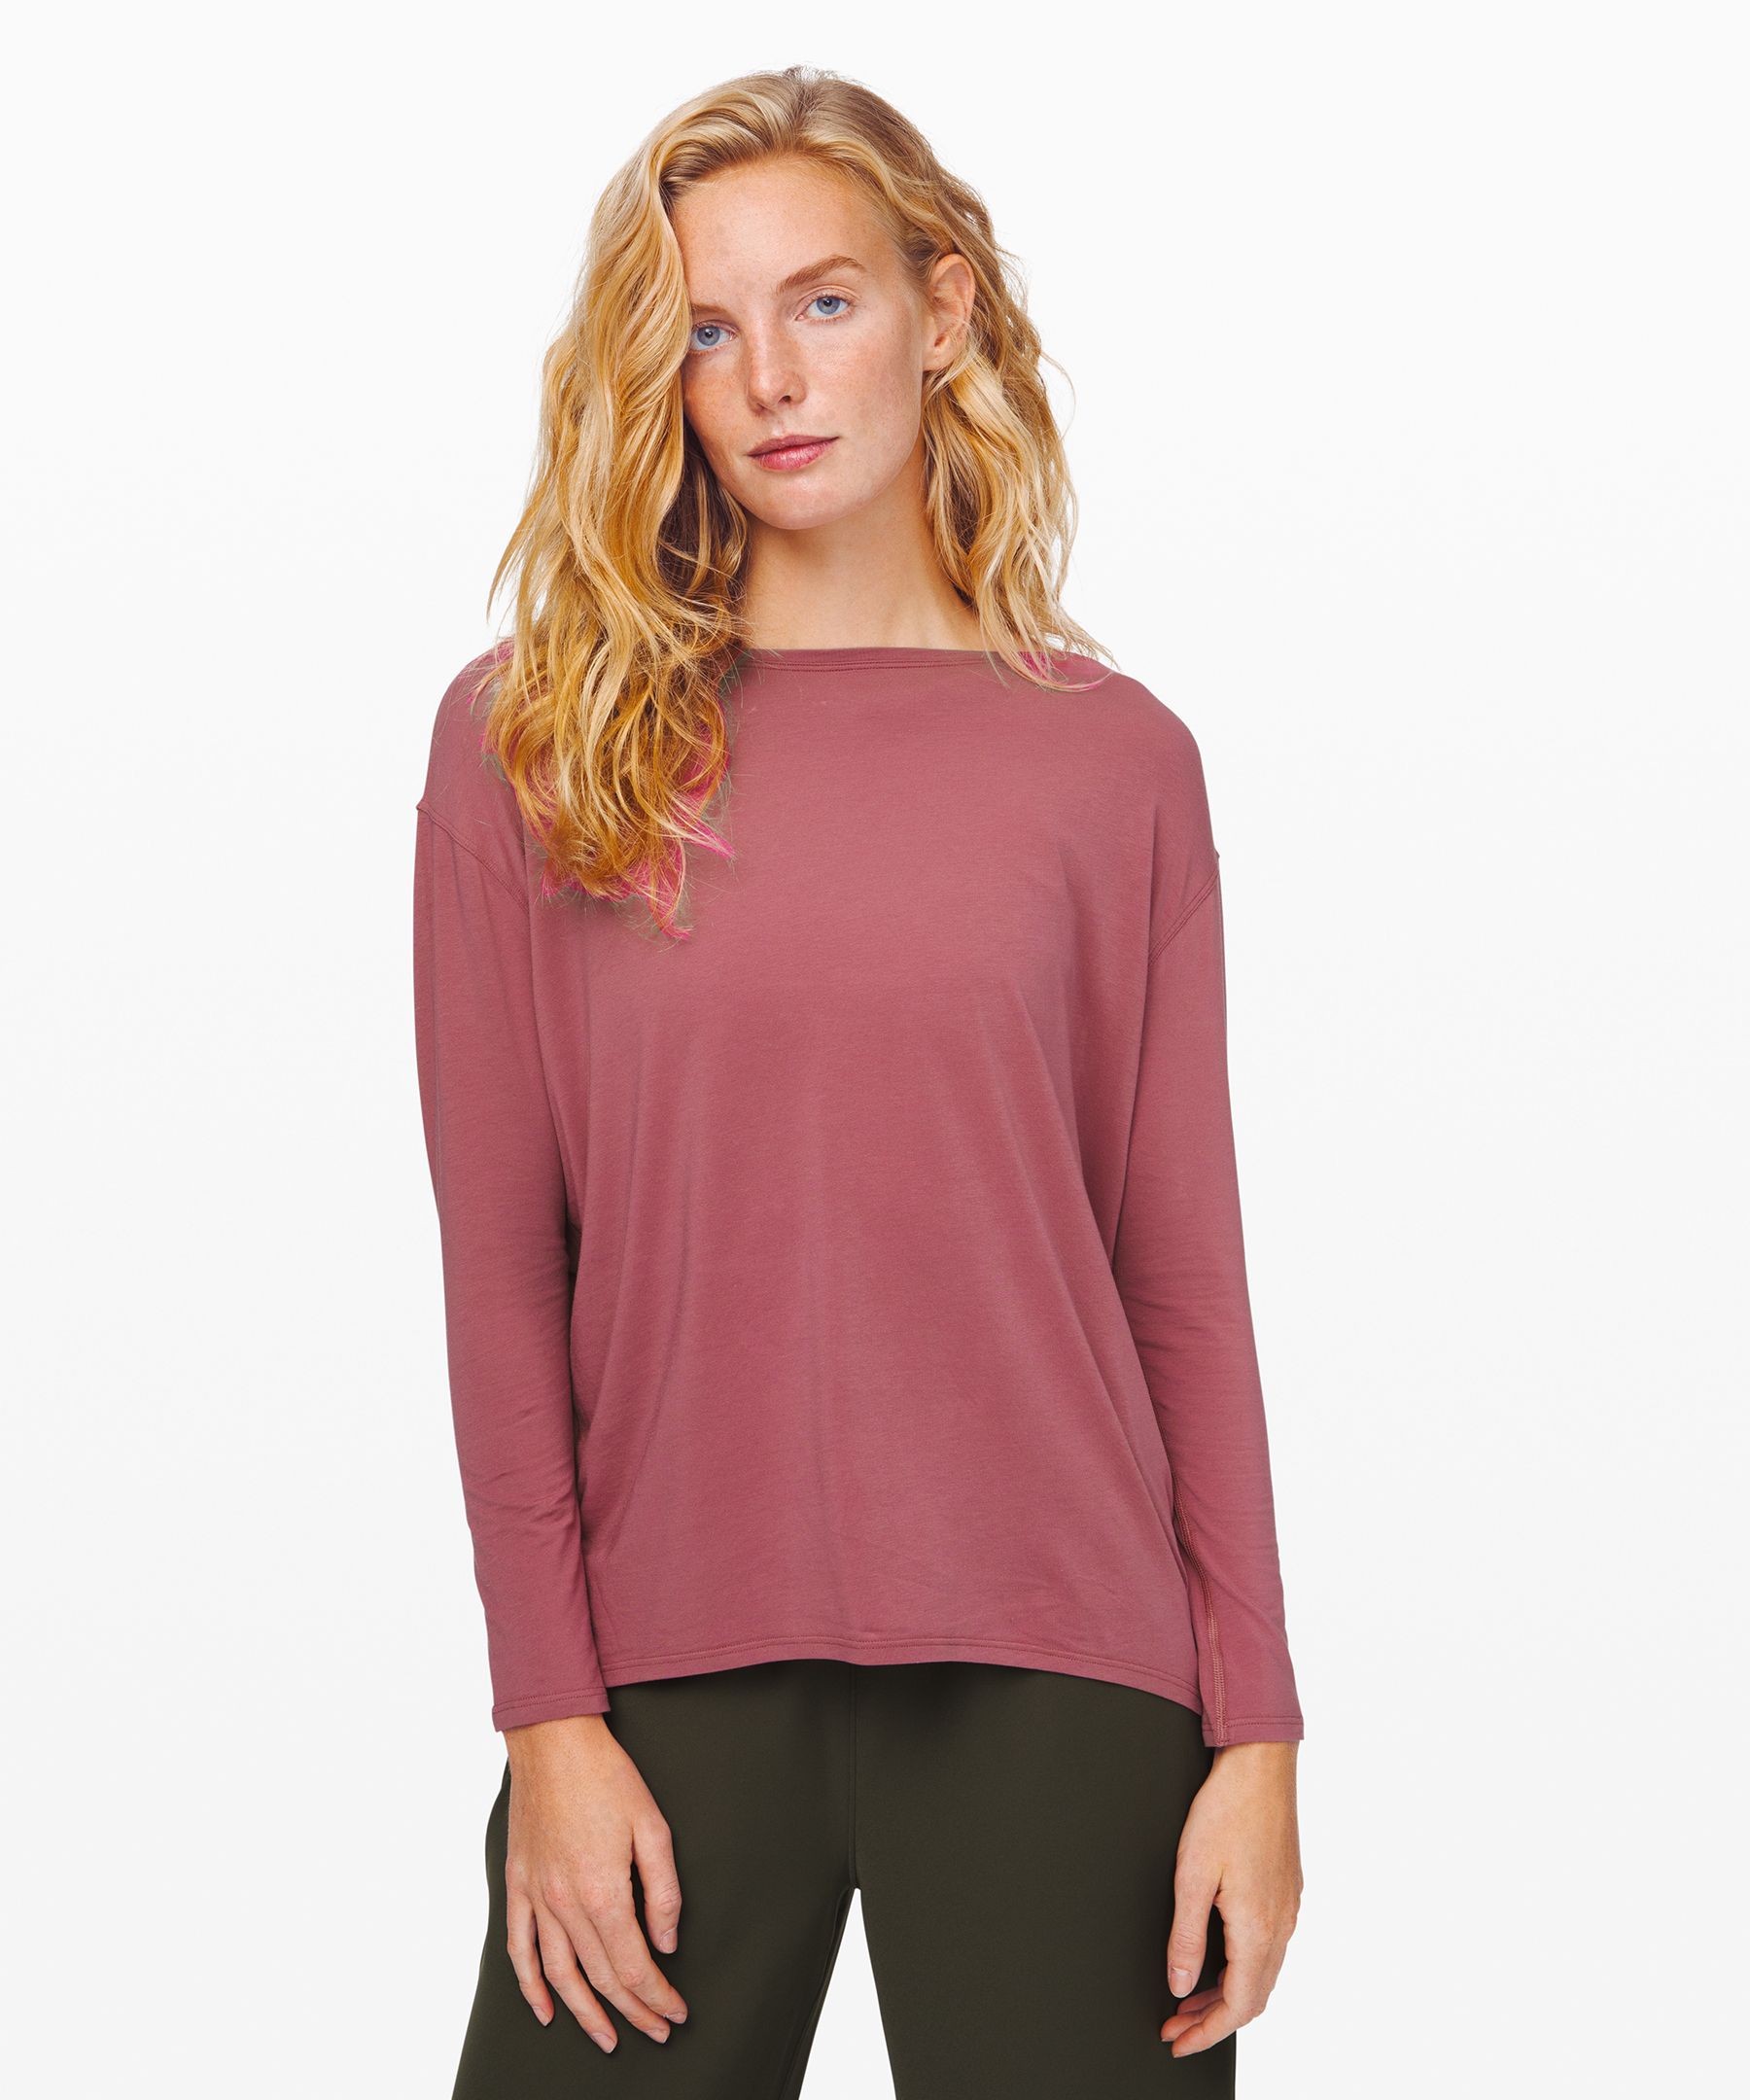 Lululemon Back In Action Long Sleeve Shirt In Pink Blossom